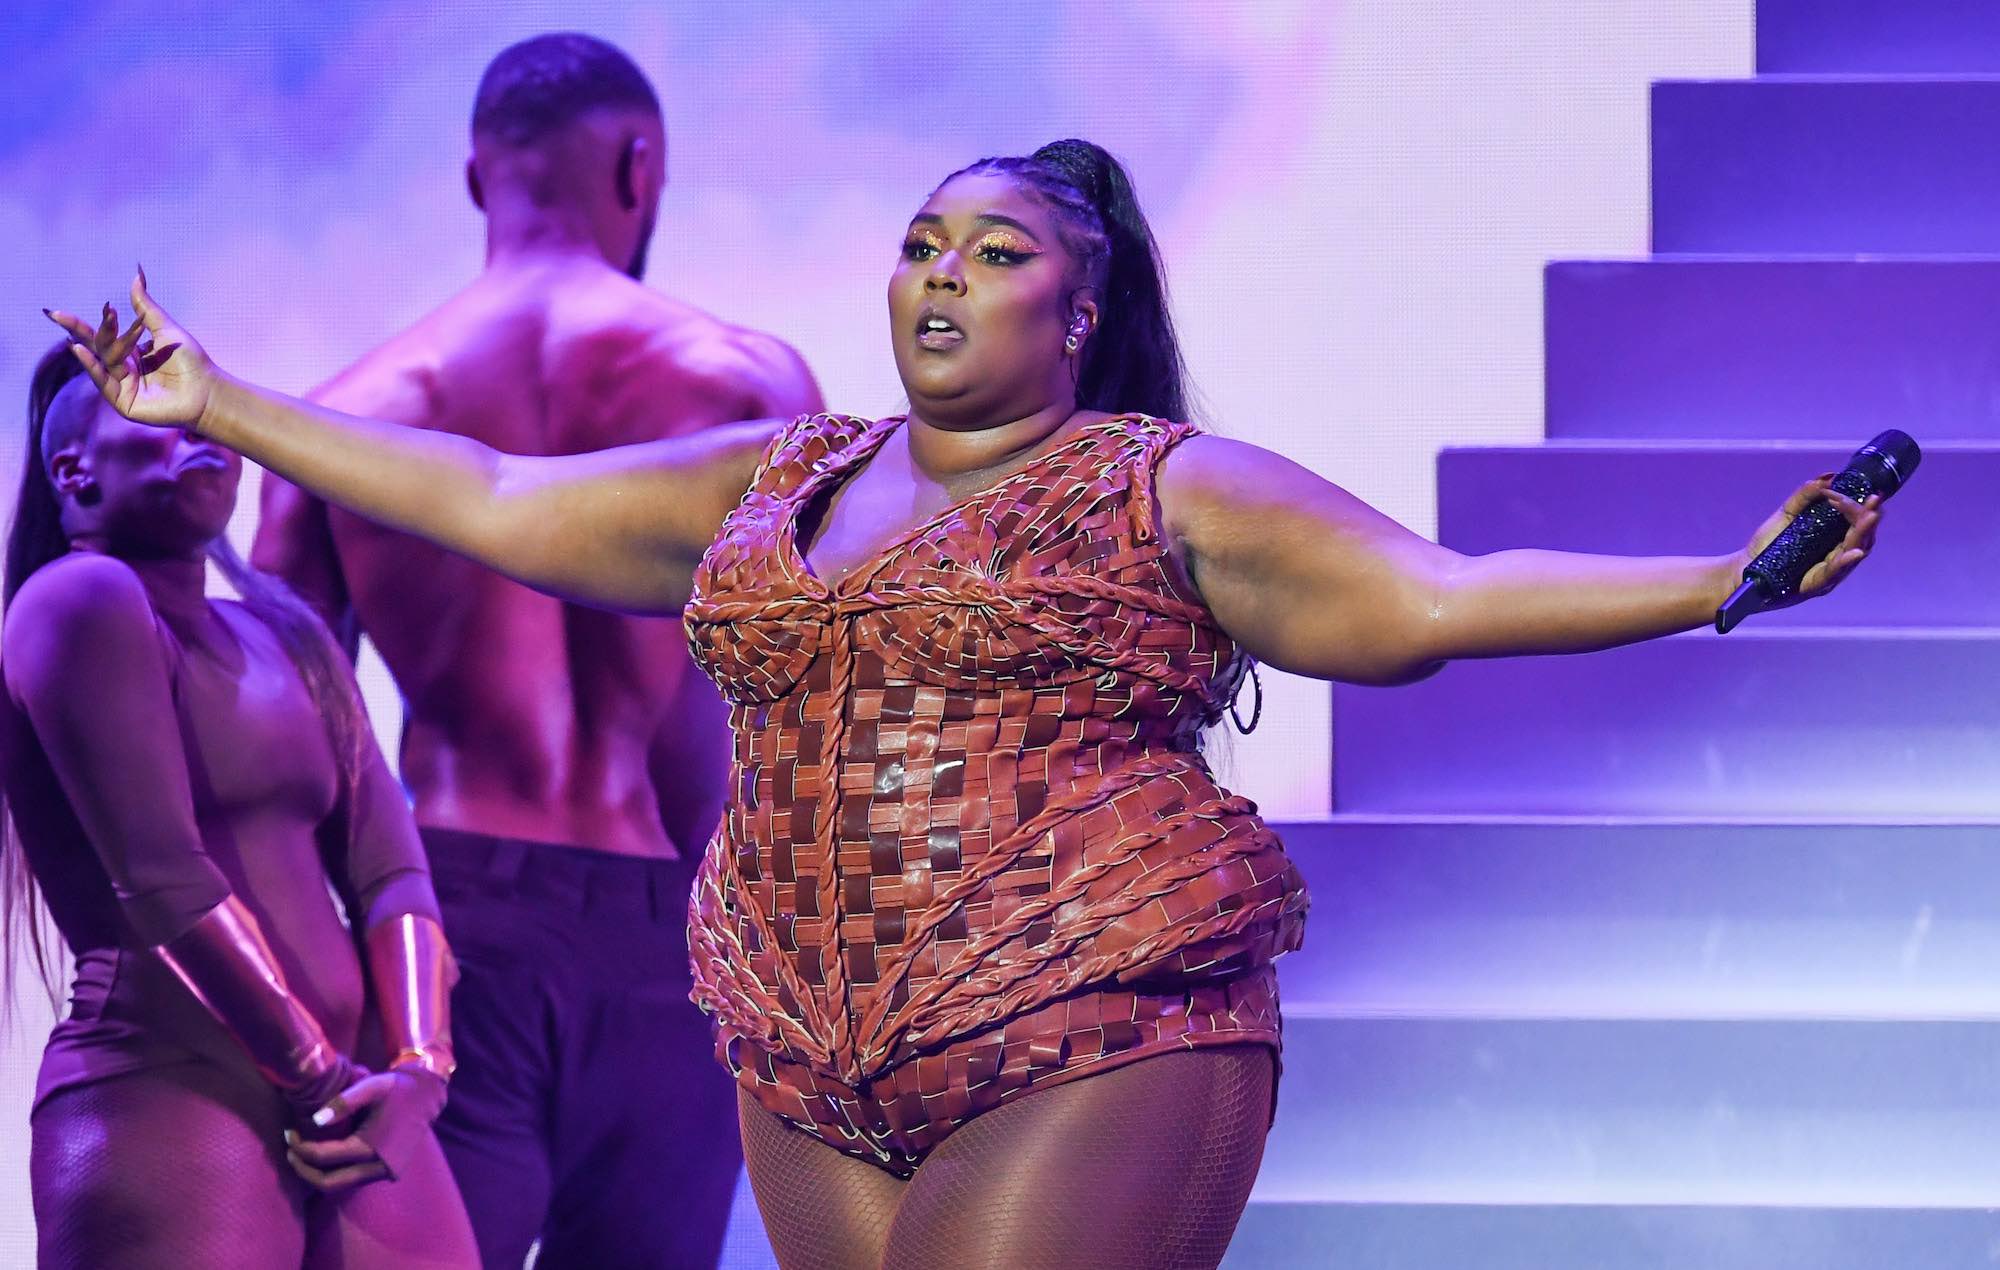 "Rumors" Exactly how large is Lizzo's net worth now? Film Daily